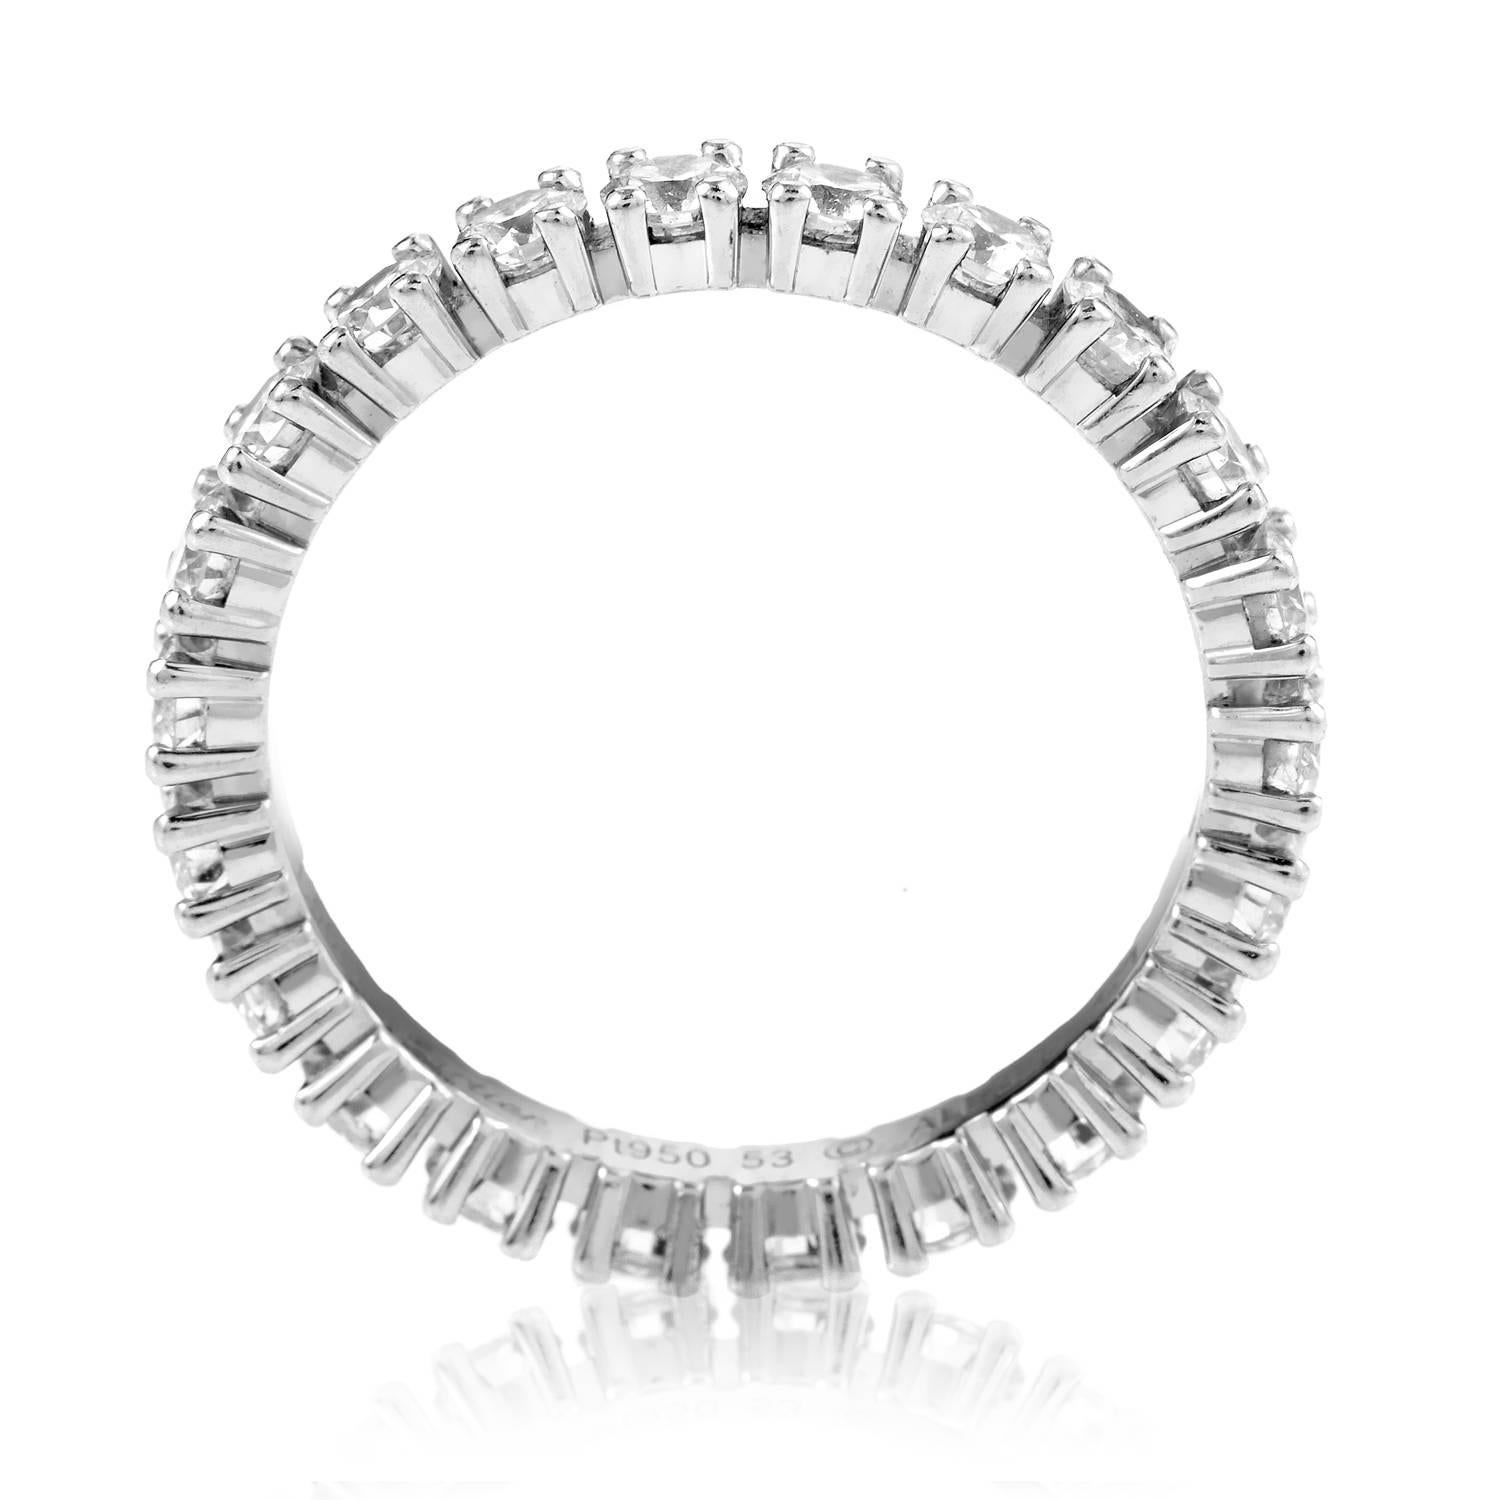 With the idea of eternity embedded into its fascinating design, this glorious band from Cartier embodies the elegance in design and perfection in crafting recognizable in the brand's opus, luxuriously blinding splendid platinum with diamonds